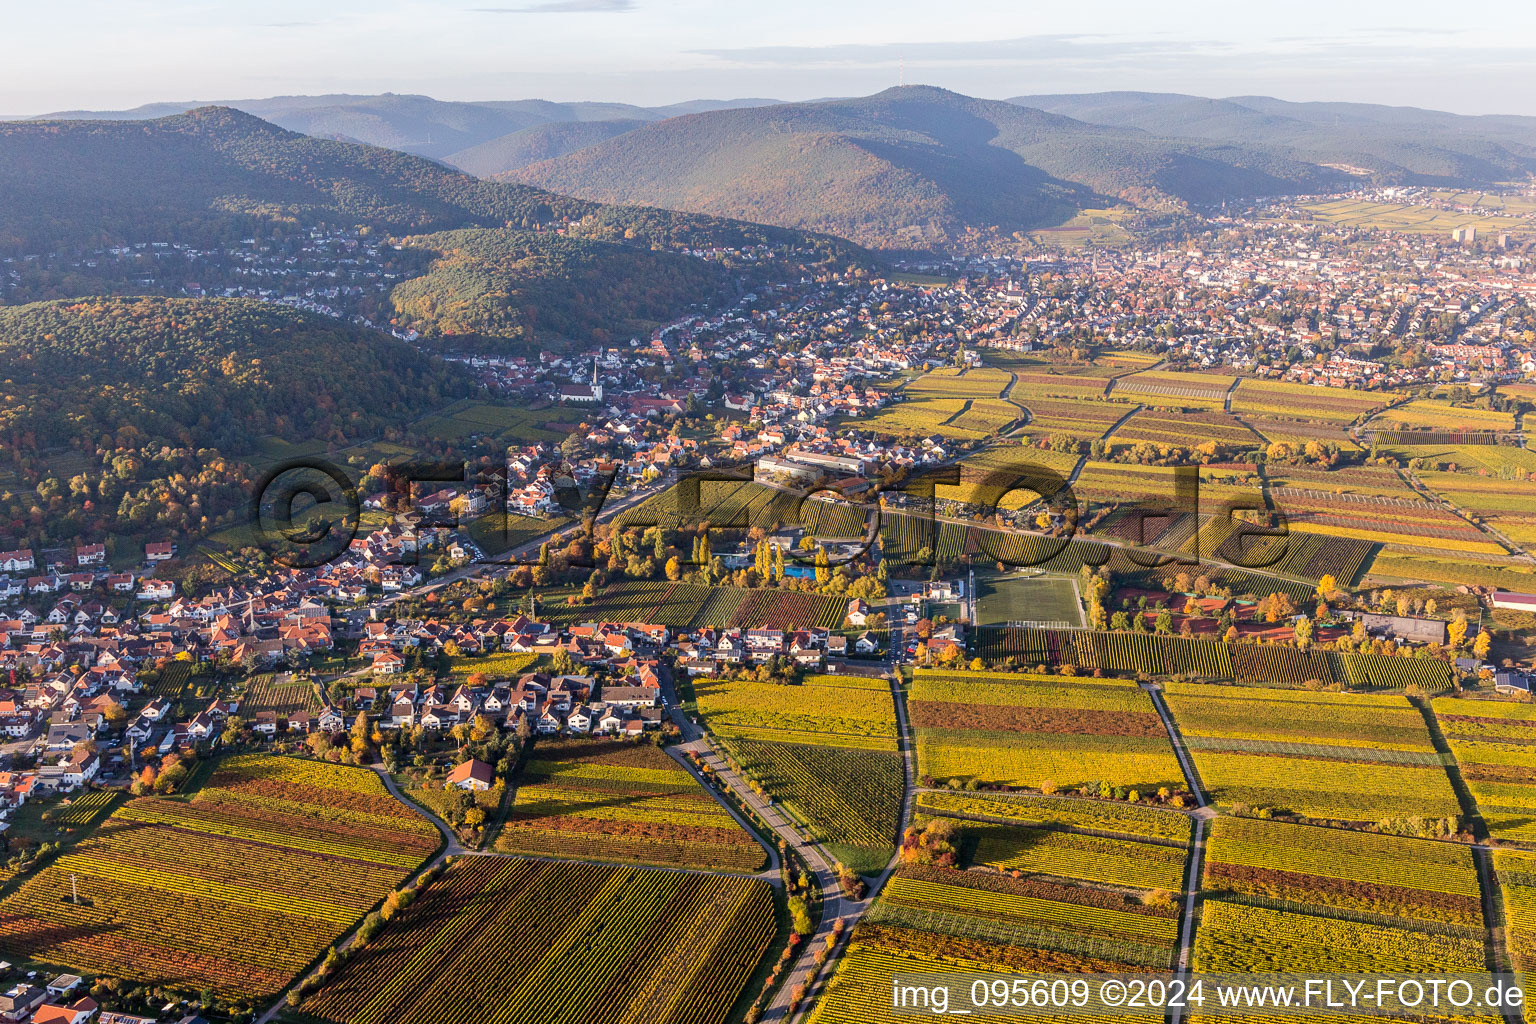 Aerial view of Village - view on the edge of wine yards in the district Hambach in Neustadt an der Weinstrasse in the state Rhineland-Palatinate, Germany